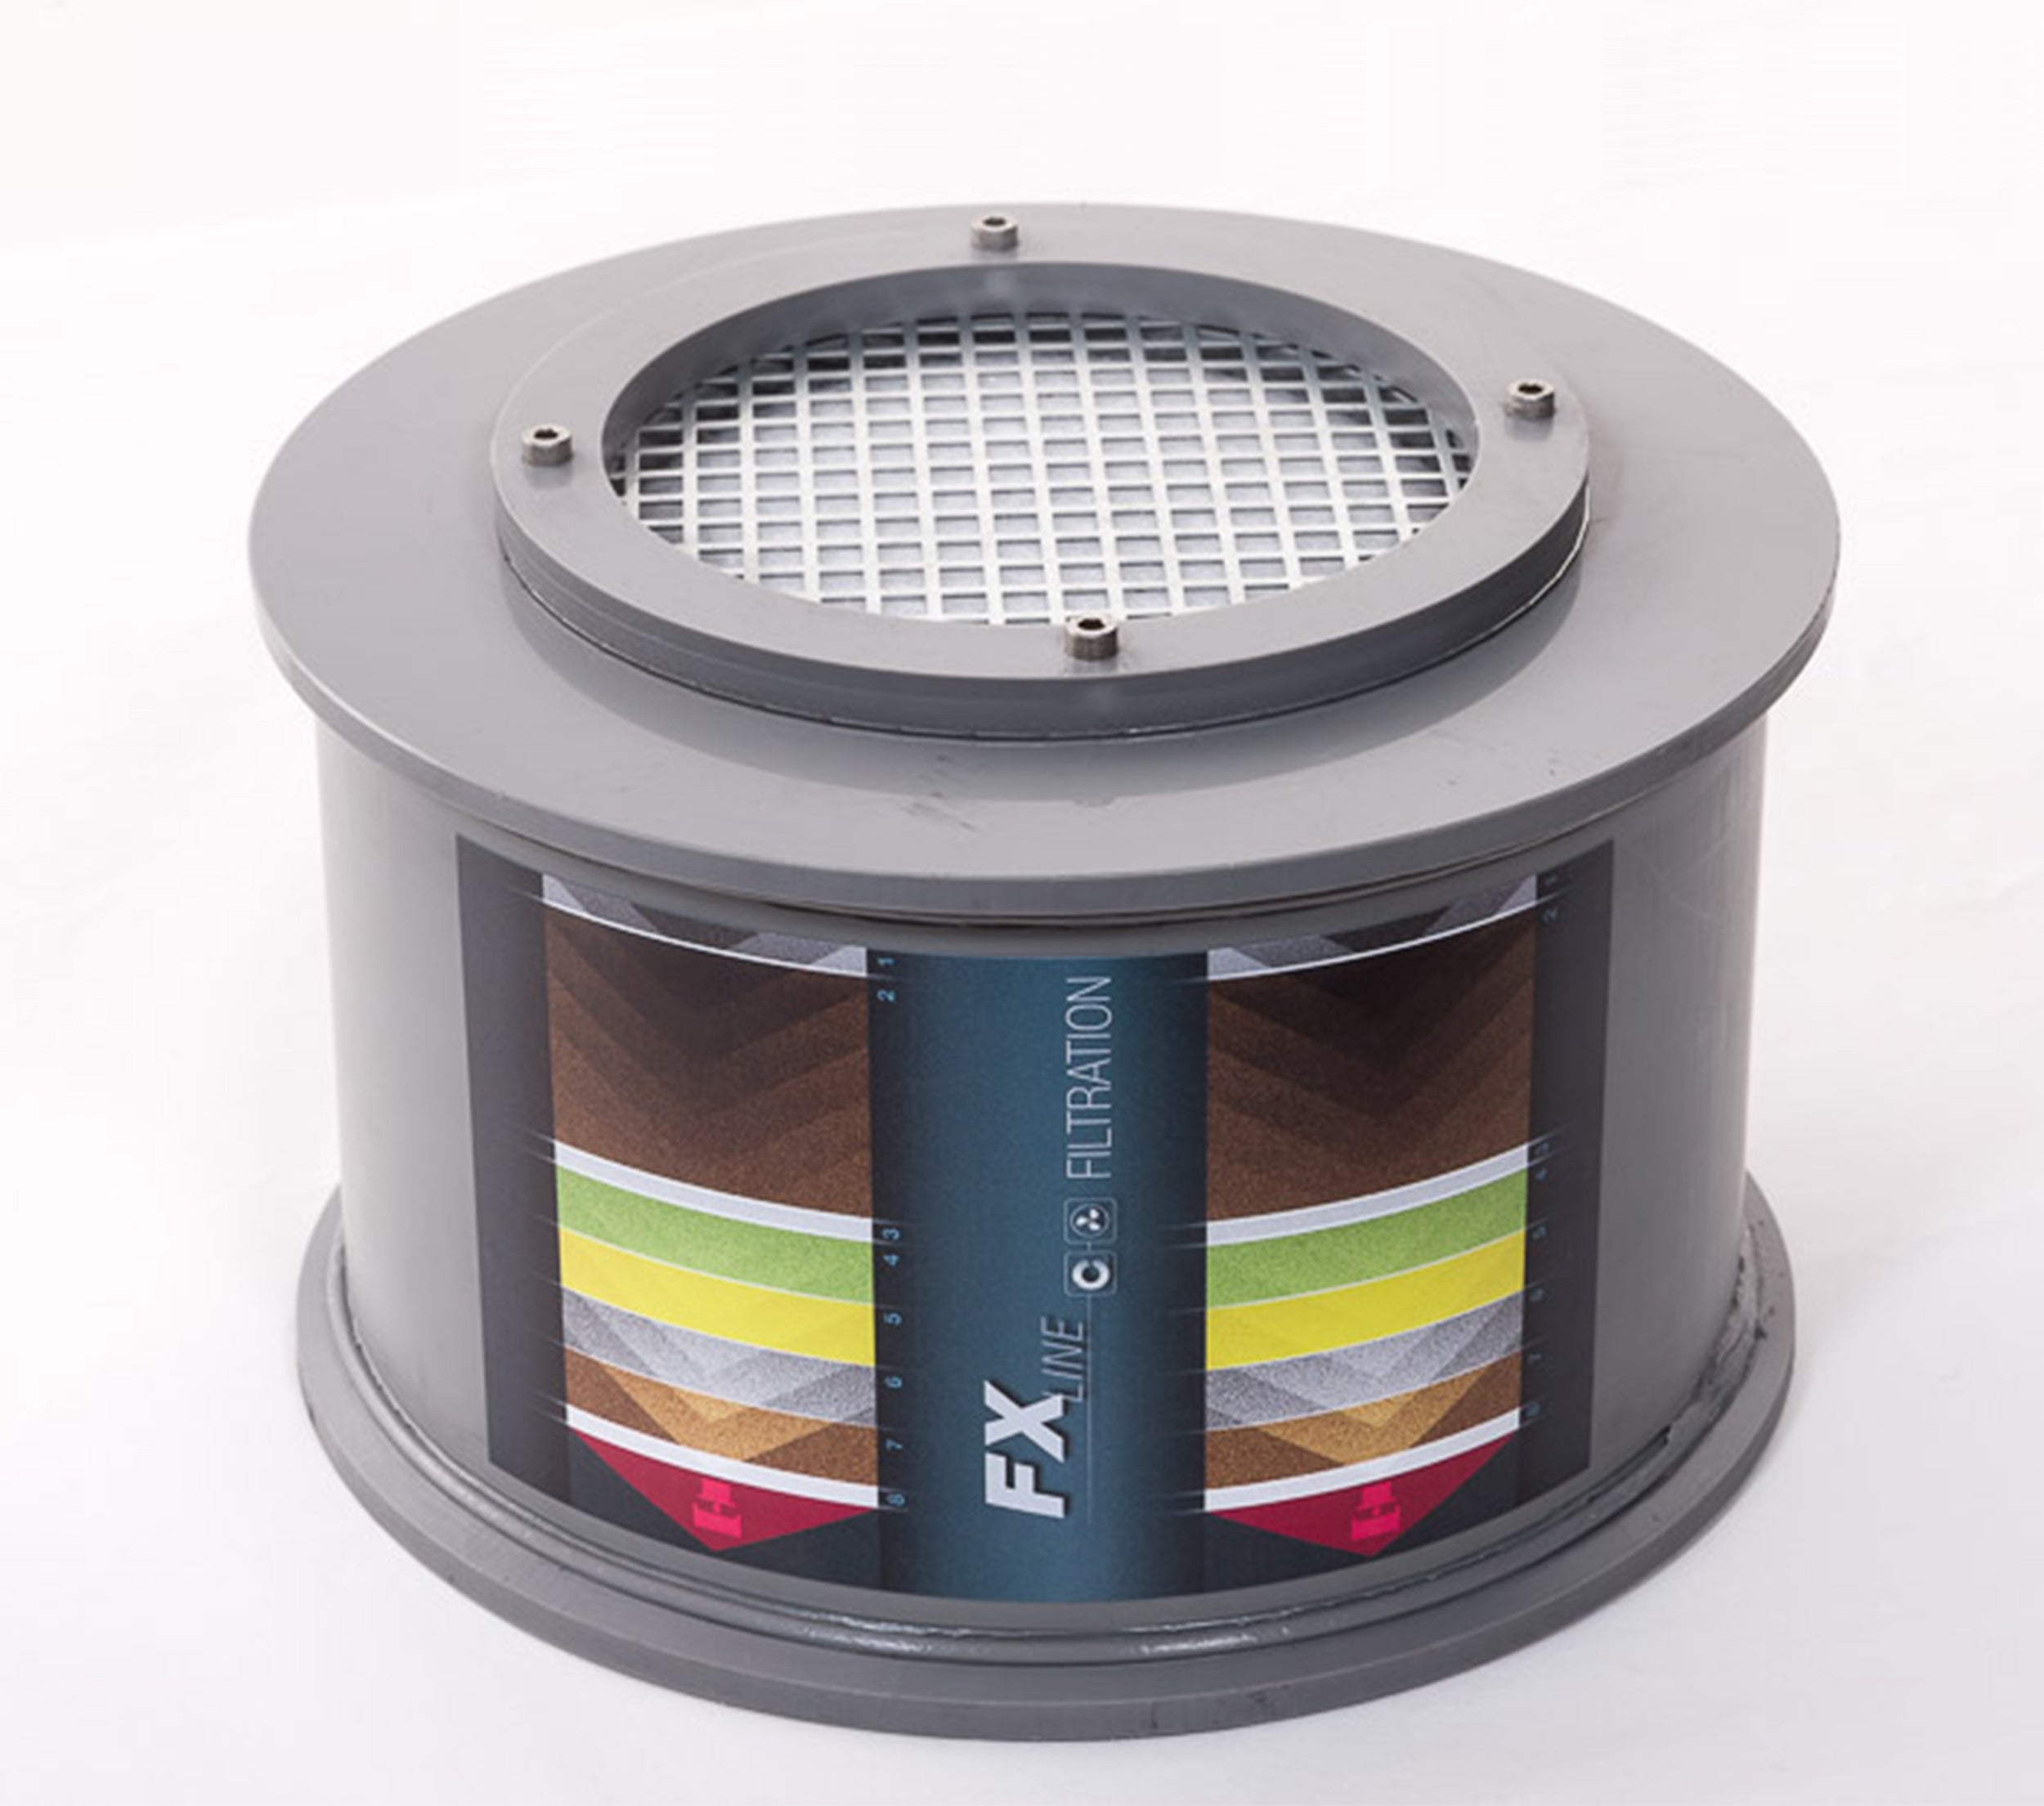 Activated carbon replacement filter for model(s): FX90, FX30 with width 600/860 mm, activated carbon